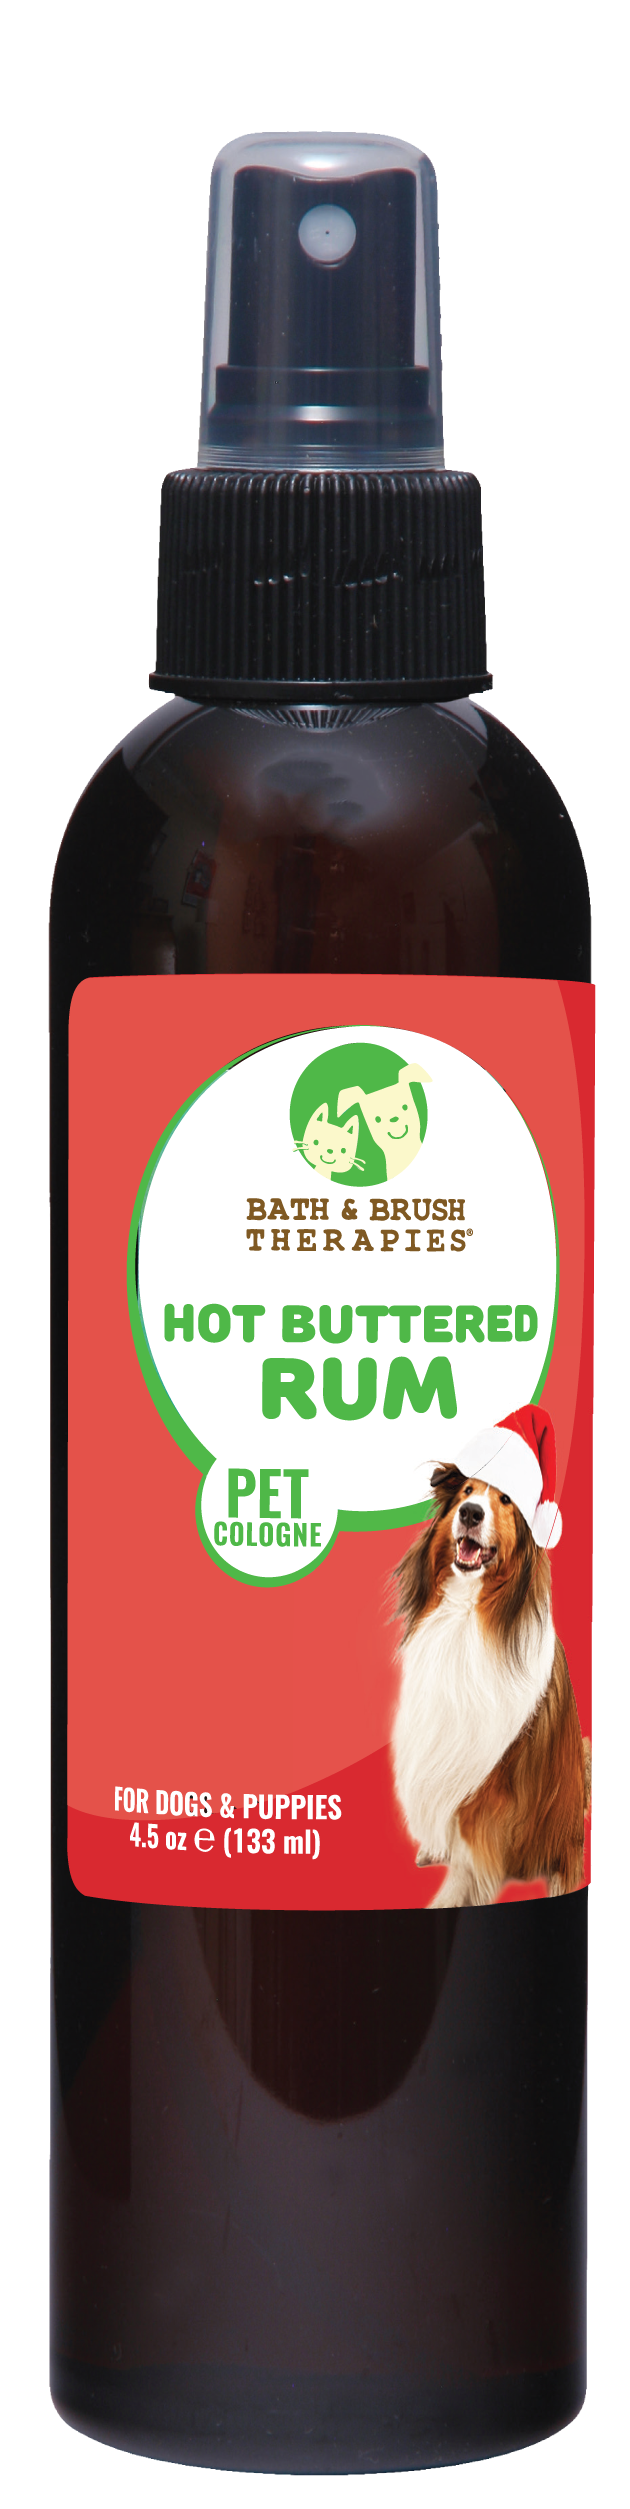 Hot Buttered Rum Pet Cologne